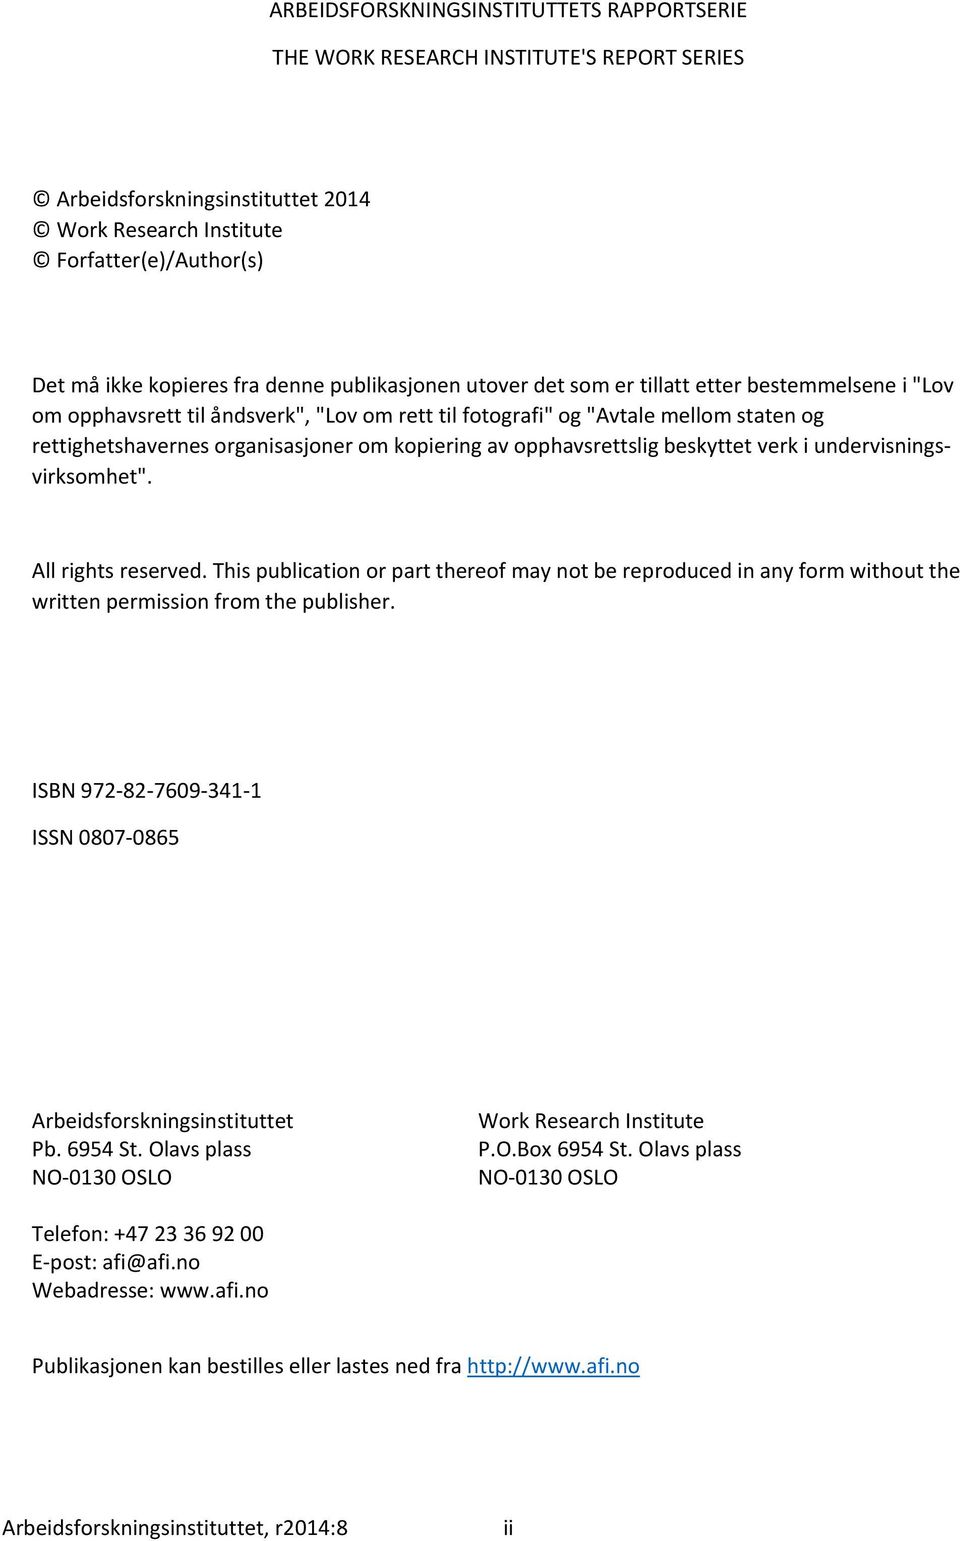 av opphavsrettslig beskyttet verk i undervisningsvirksomhet". All rights reserved. This publication or part thereof may not be reproduced in any form without the written permission from the publisher.